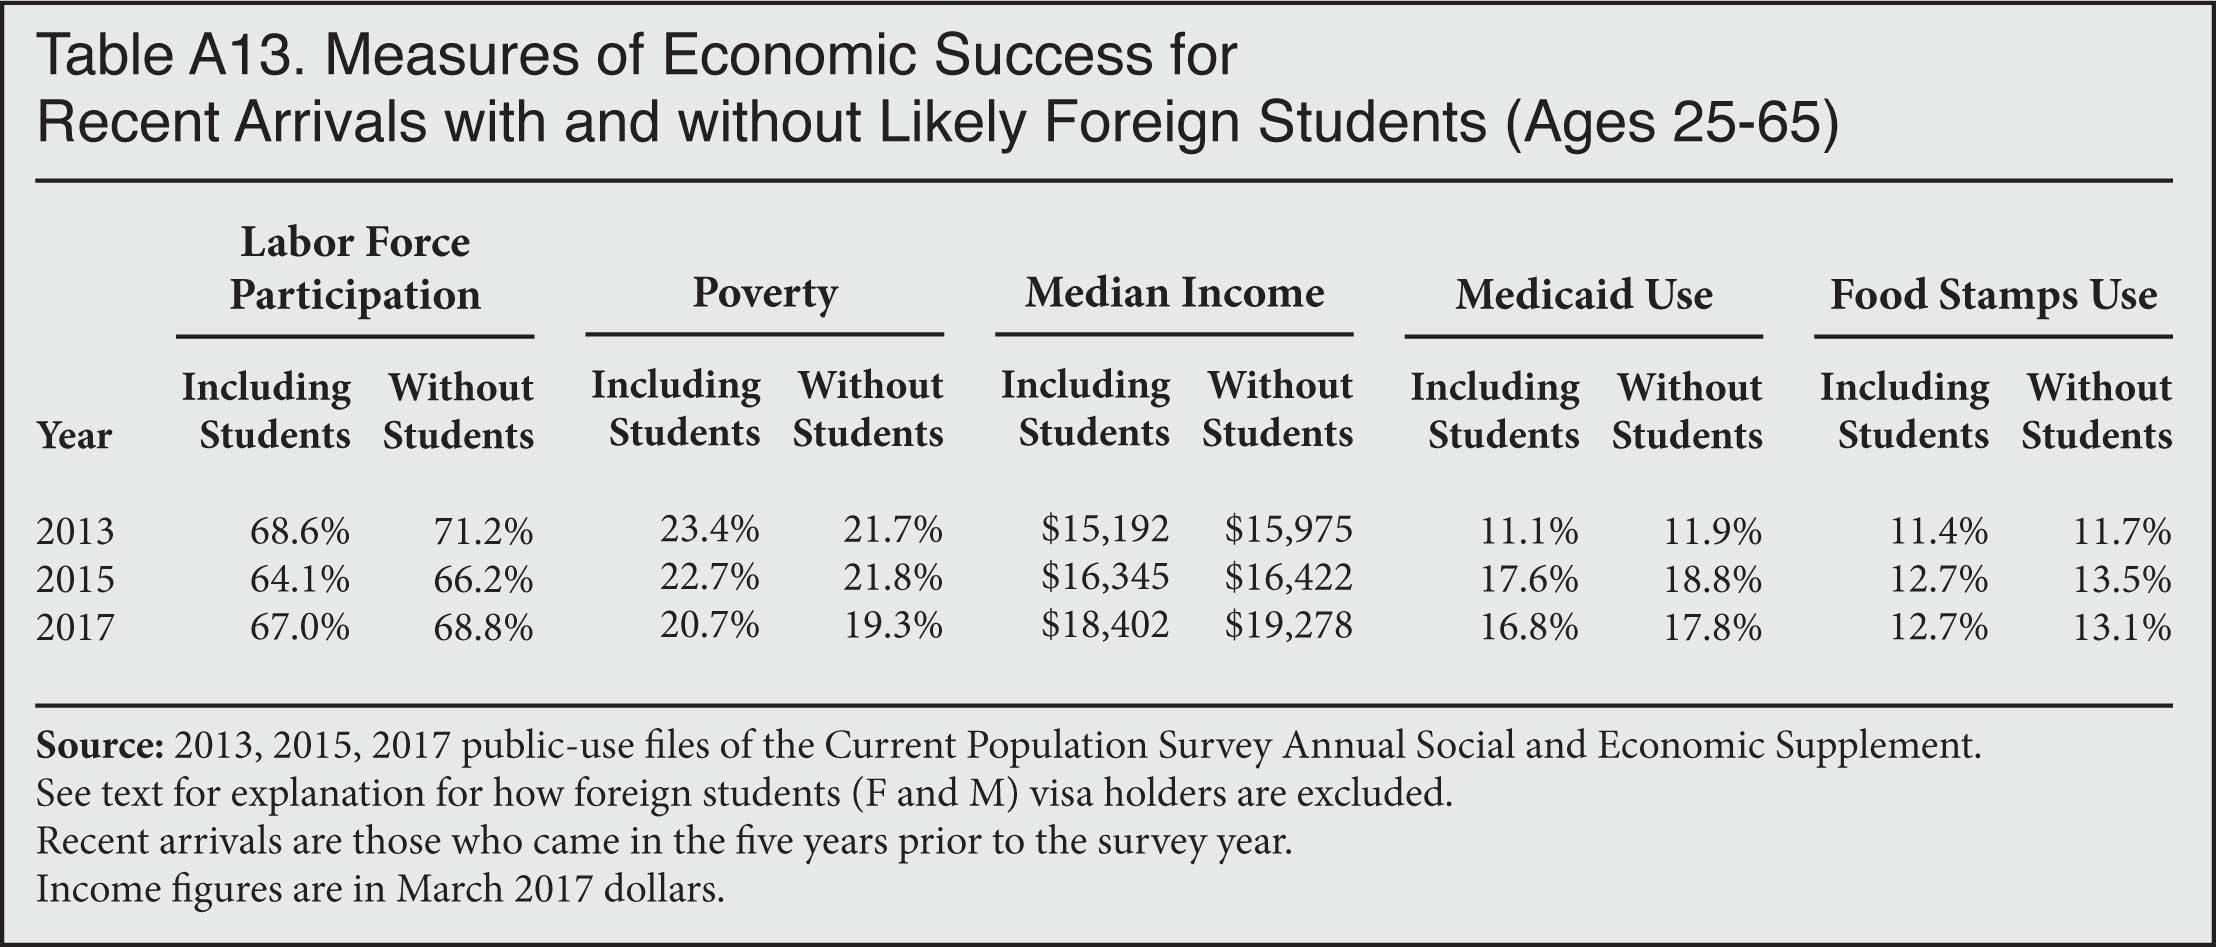 Table: Measures of Economic Success for Recent Arrivals with and without Likely Foreign Students, 2007-2017